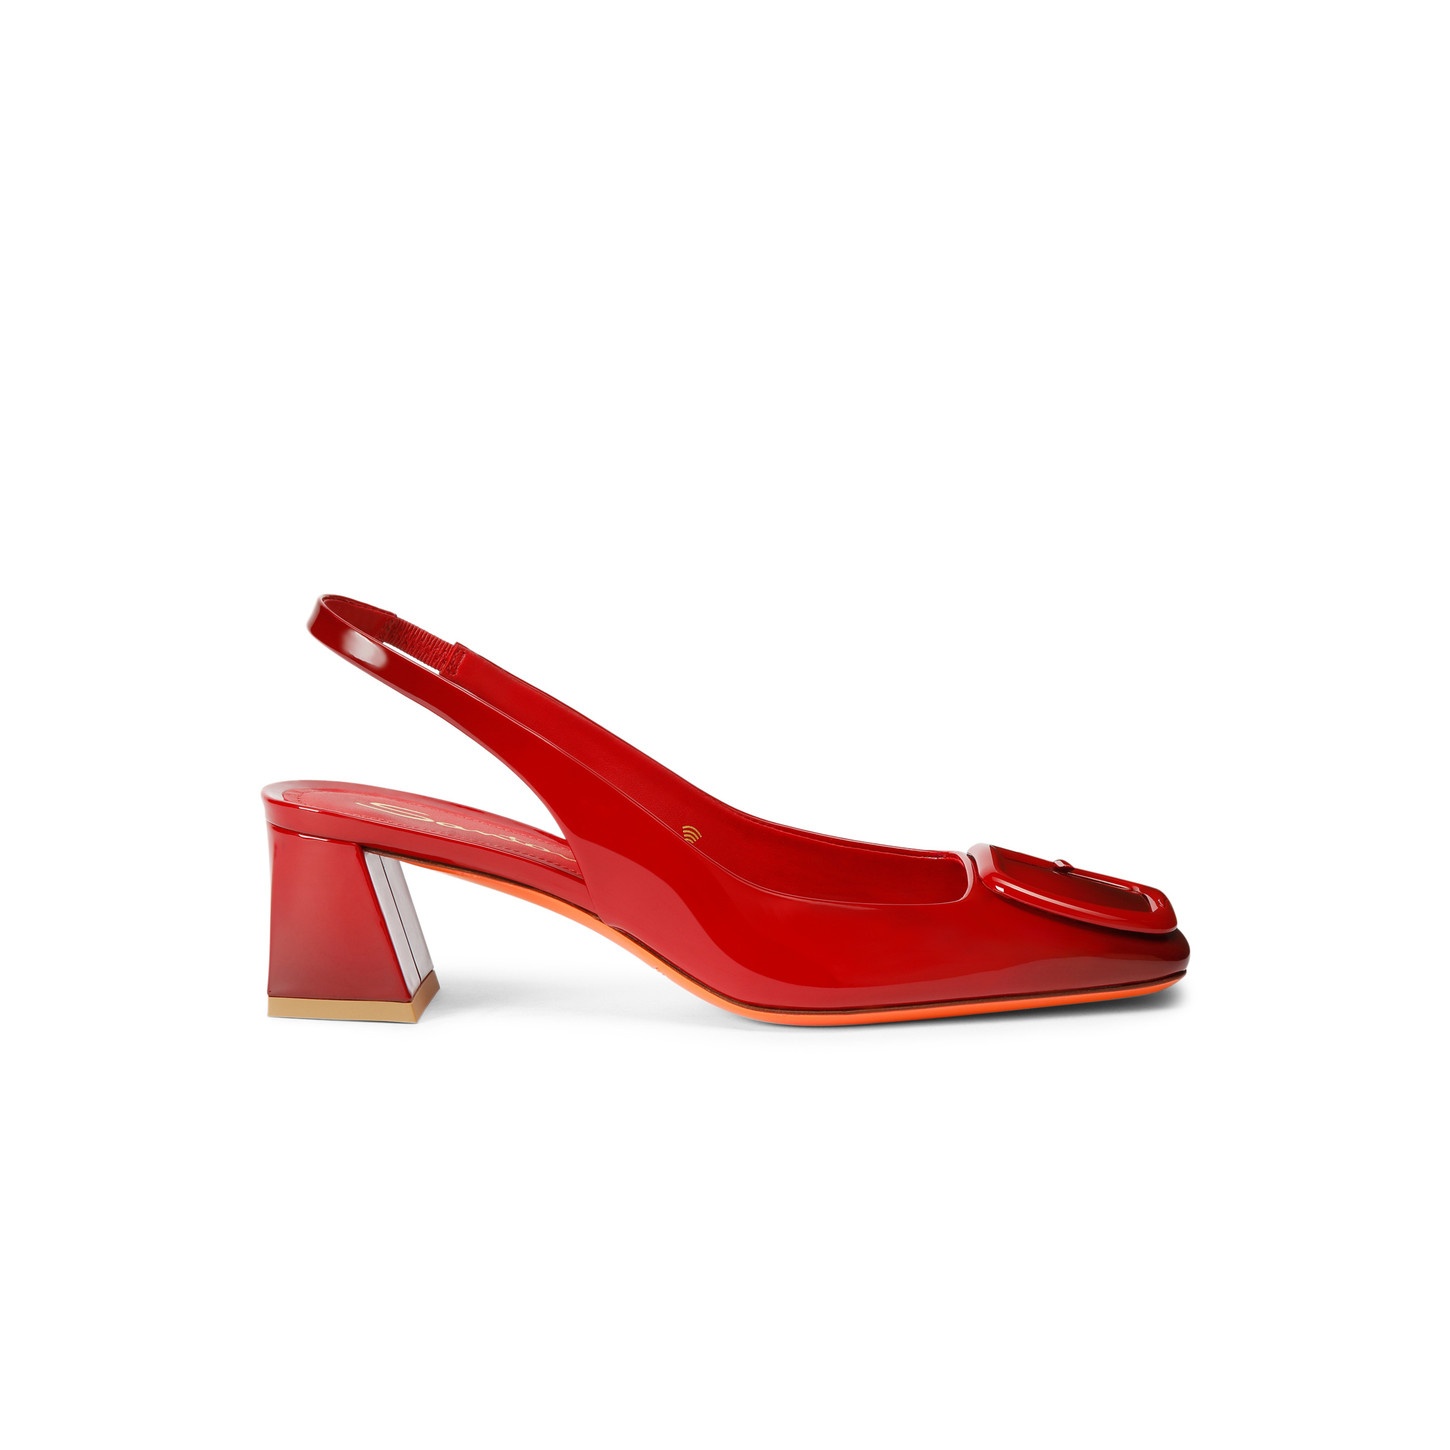 Women's red patent leather mid-heel slingback - 1